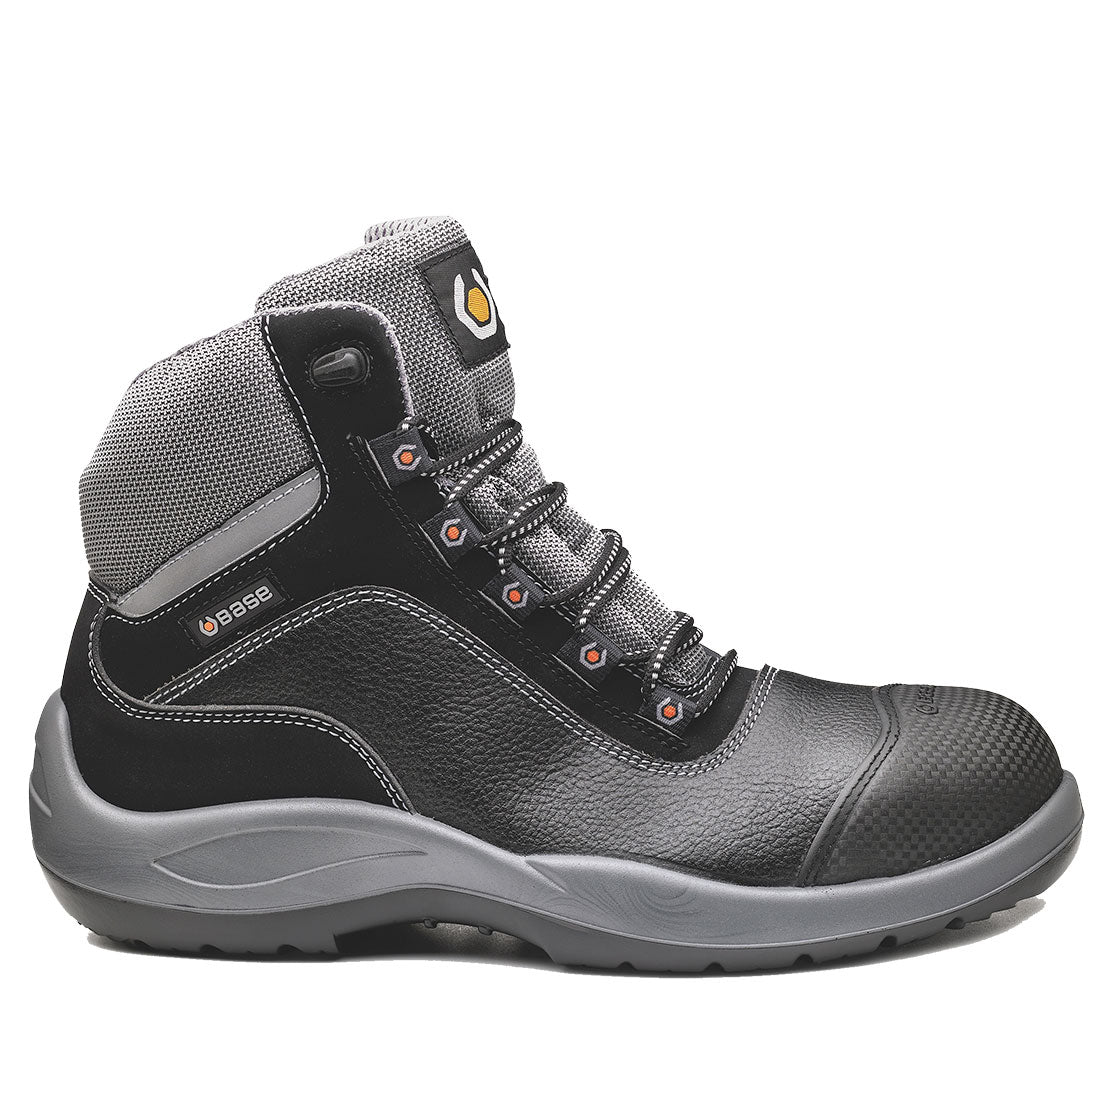 Base Beethoven Safety Boots S3 SRC